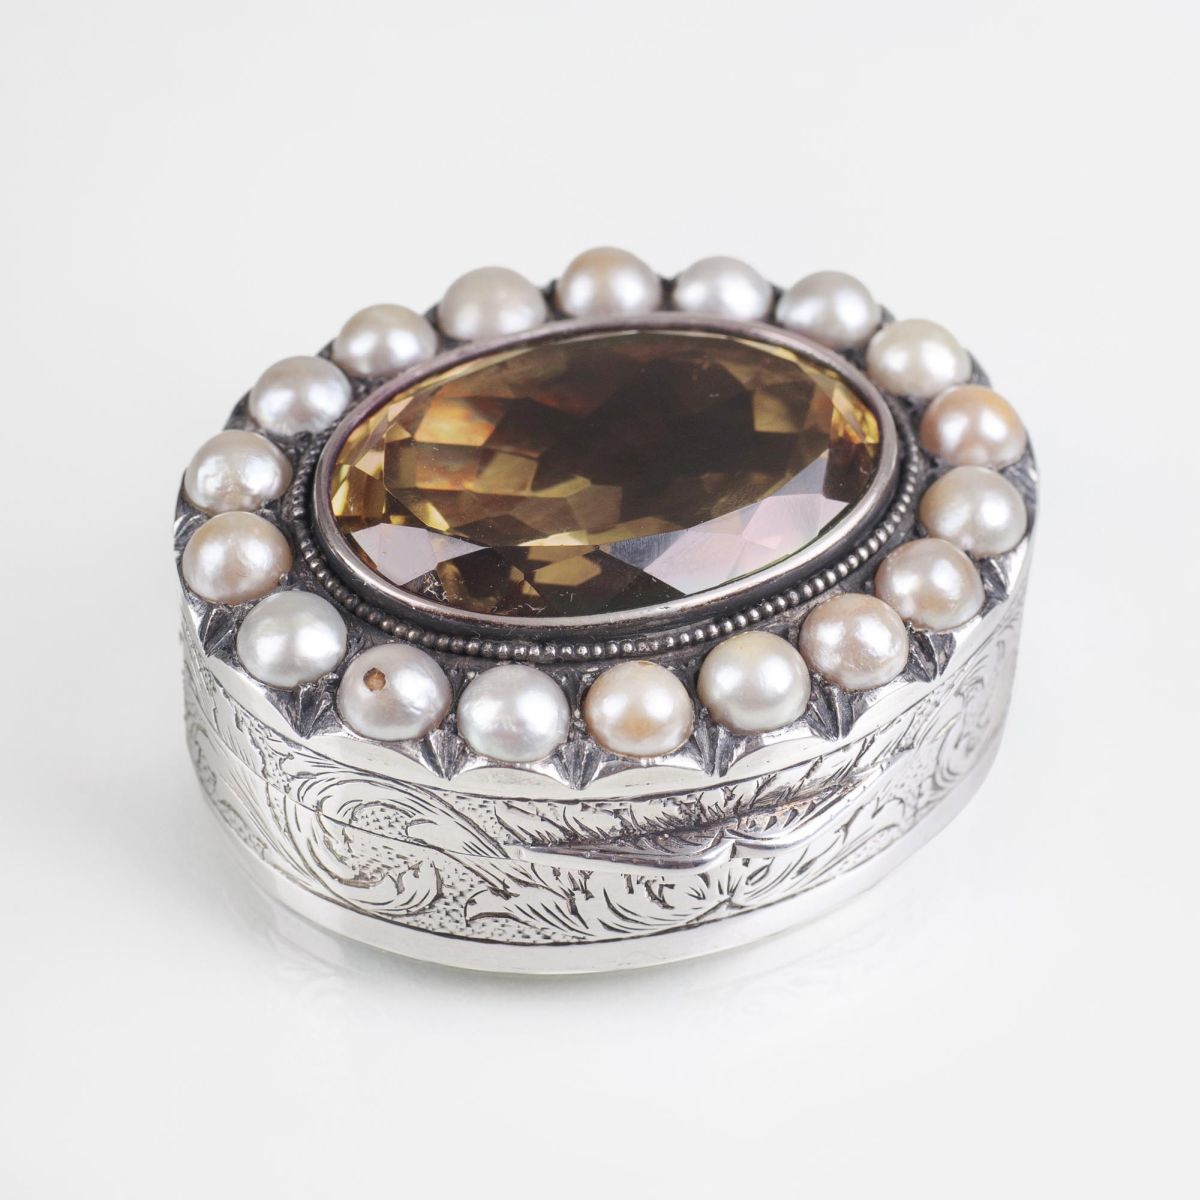 A small box with large citrine and pearls